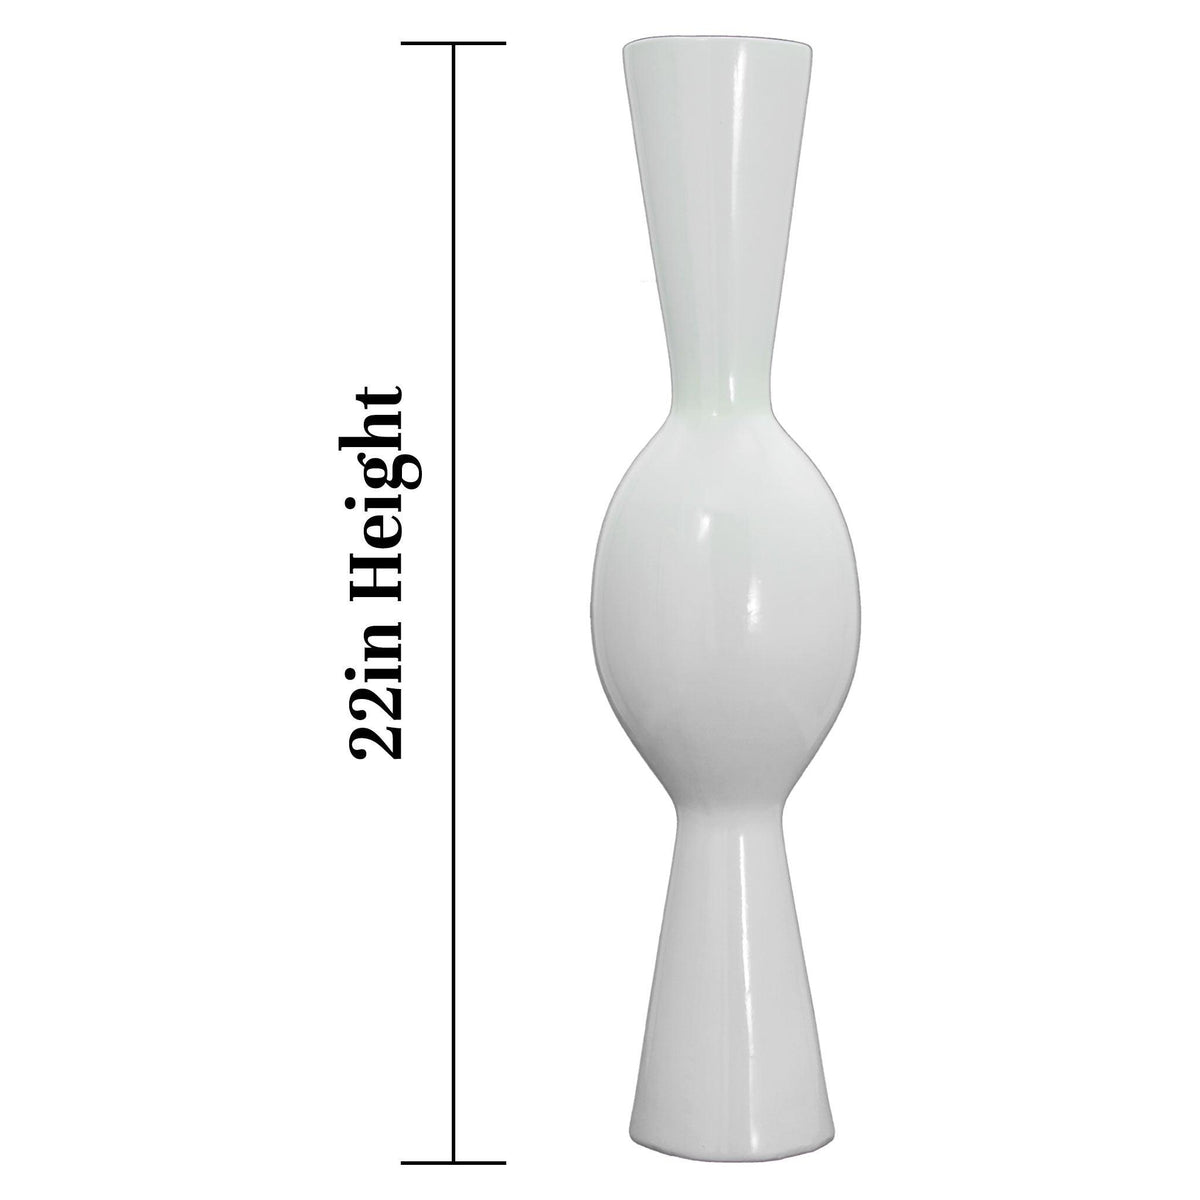 Lee Display's brand new 22in Loutrophoros Ceramic Vase comes in a high gloss white finish on sale at leedisplay.com